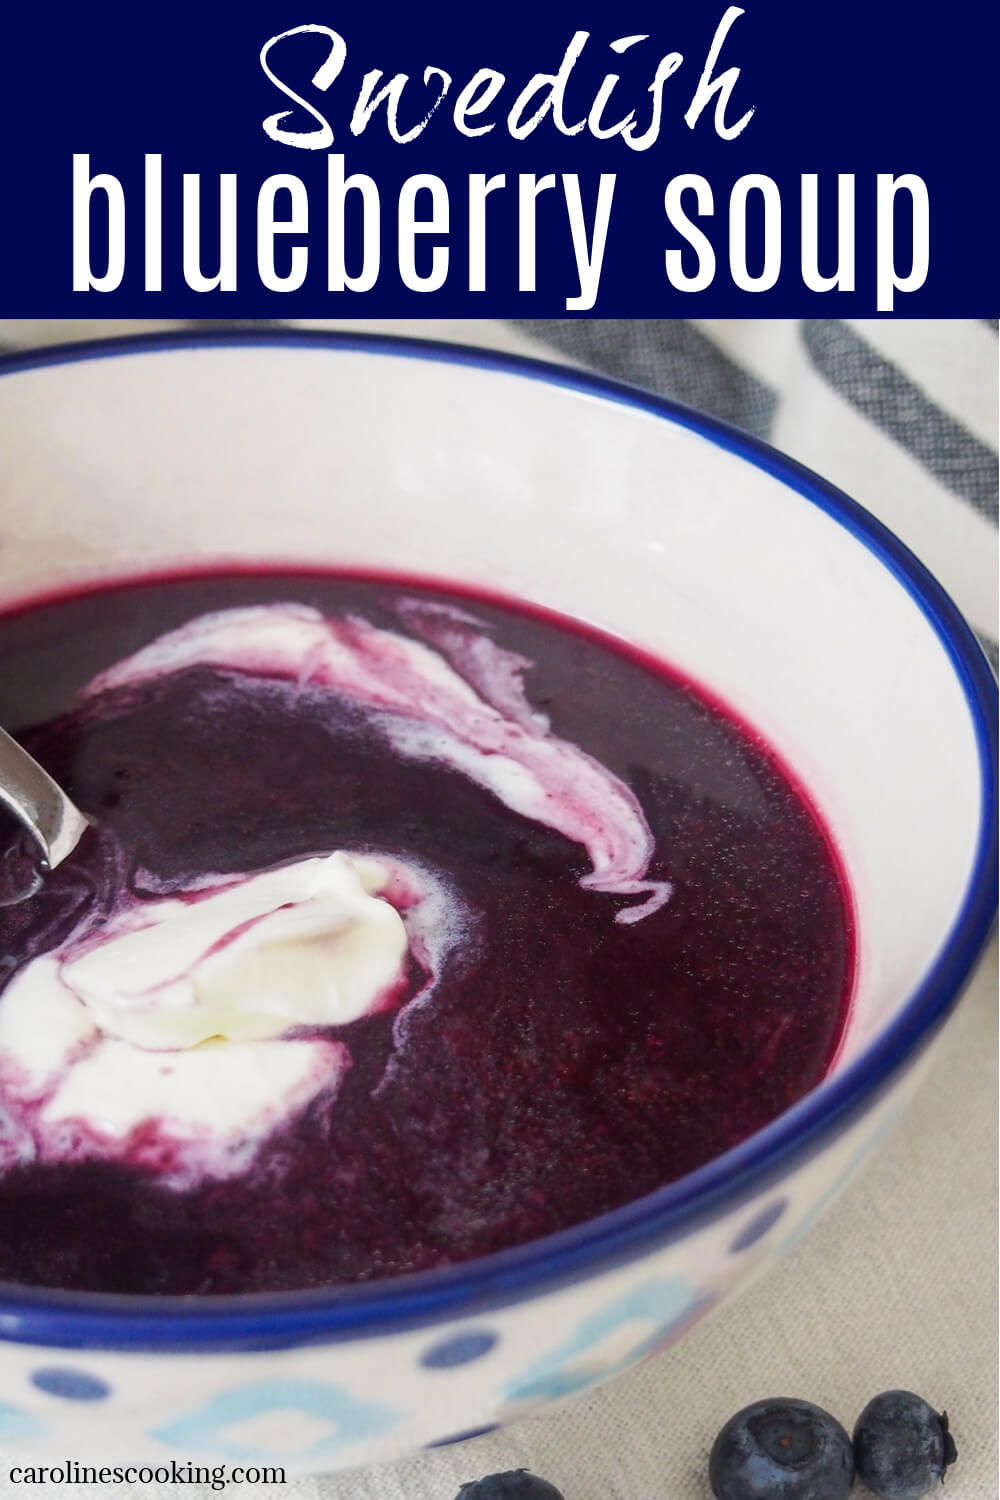 Soup for dessert might sound unusual, but this Swedish blueberry soup is exactly that!  It's a wonderfully comforting dish that you can enjoy warm or chilled.  It's really easy to make, and a lovely (and relatively healthy) treat to enjoy any time of year.